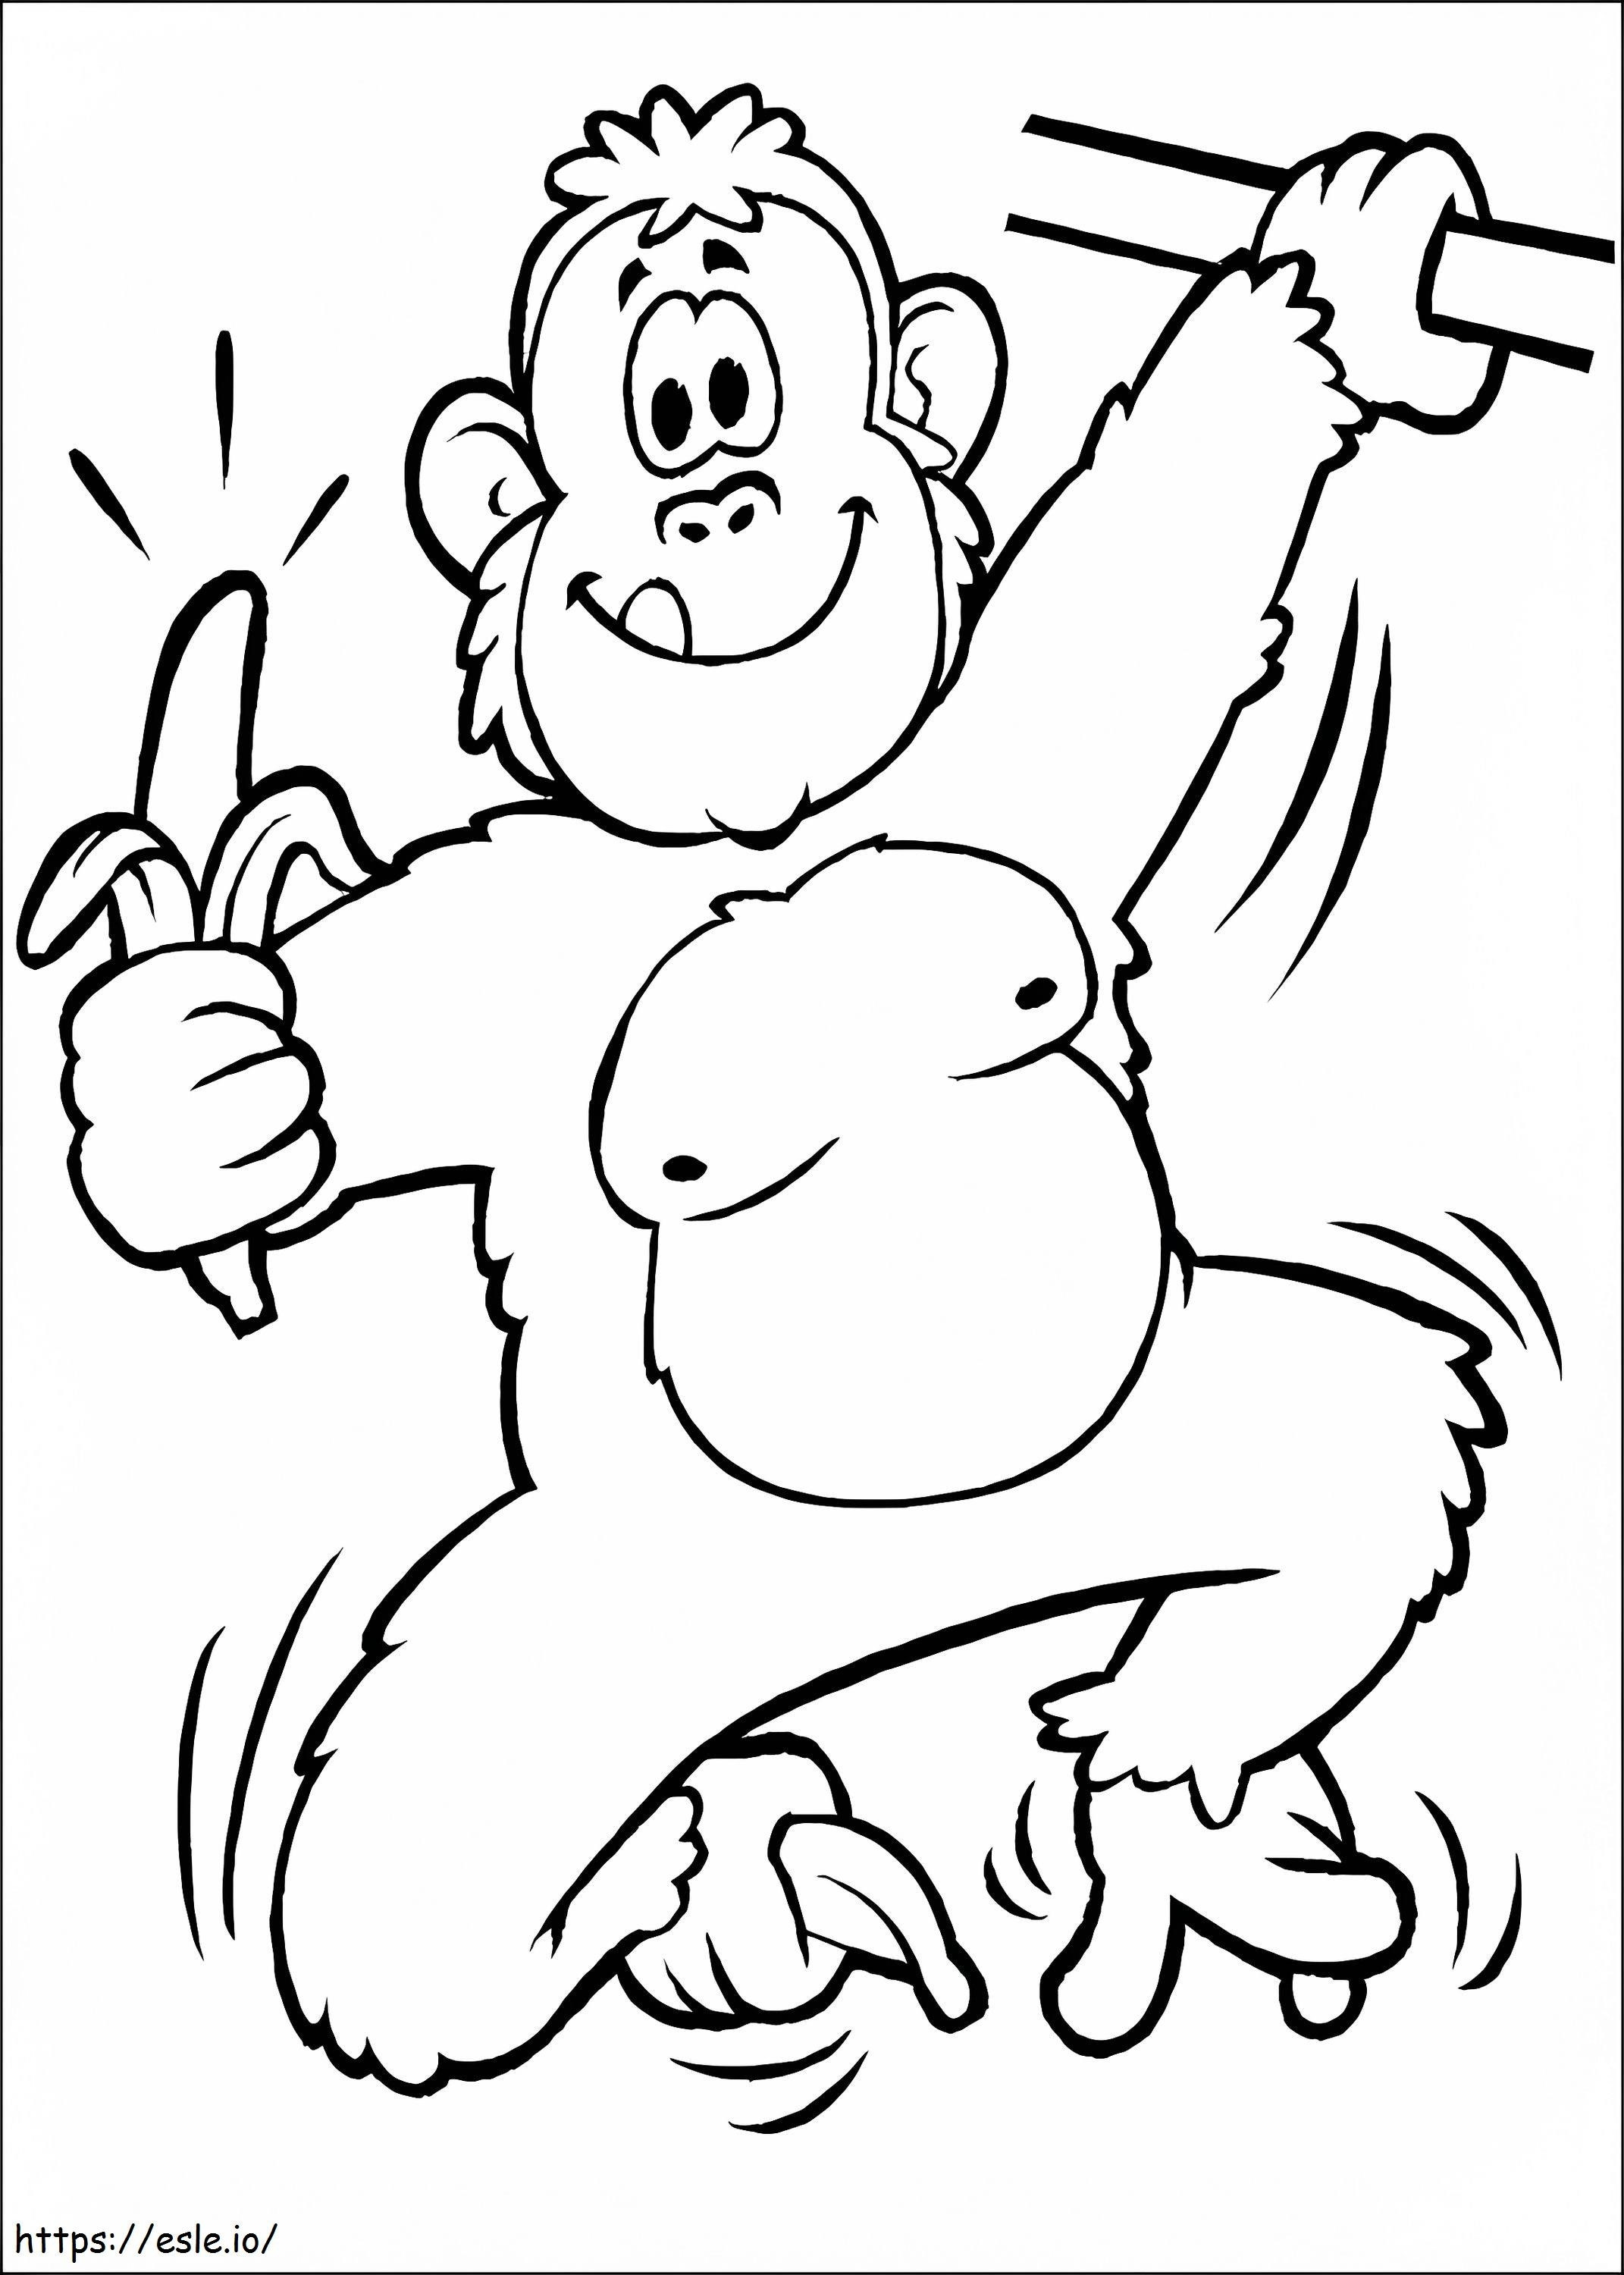 Funny Monkey Holding Banana coloring page